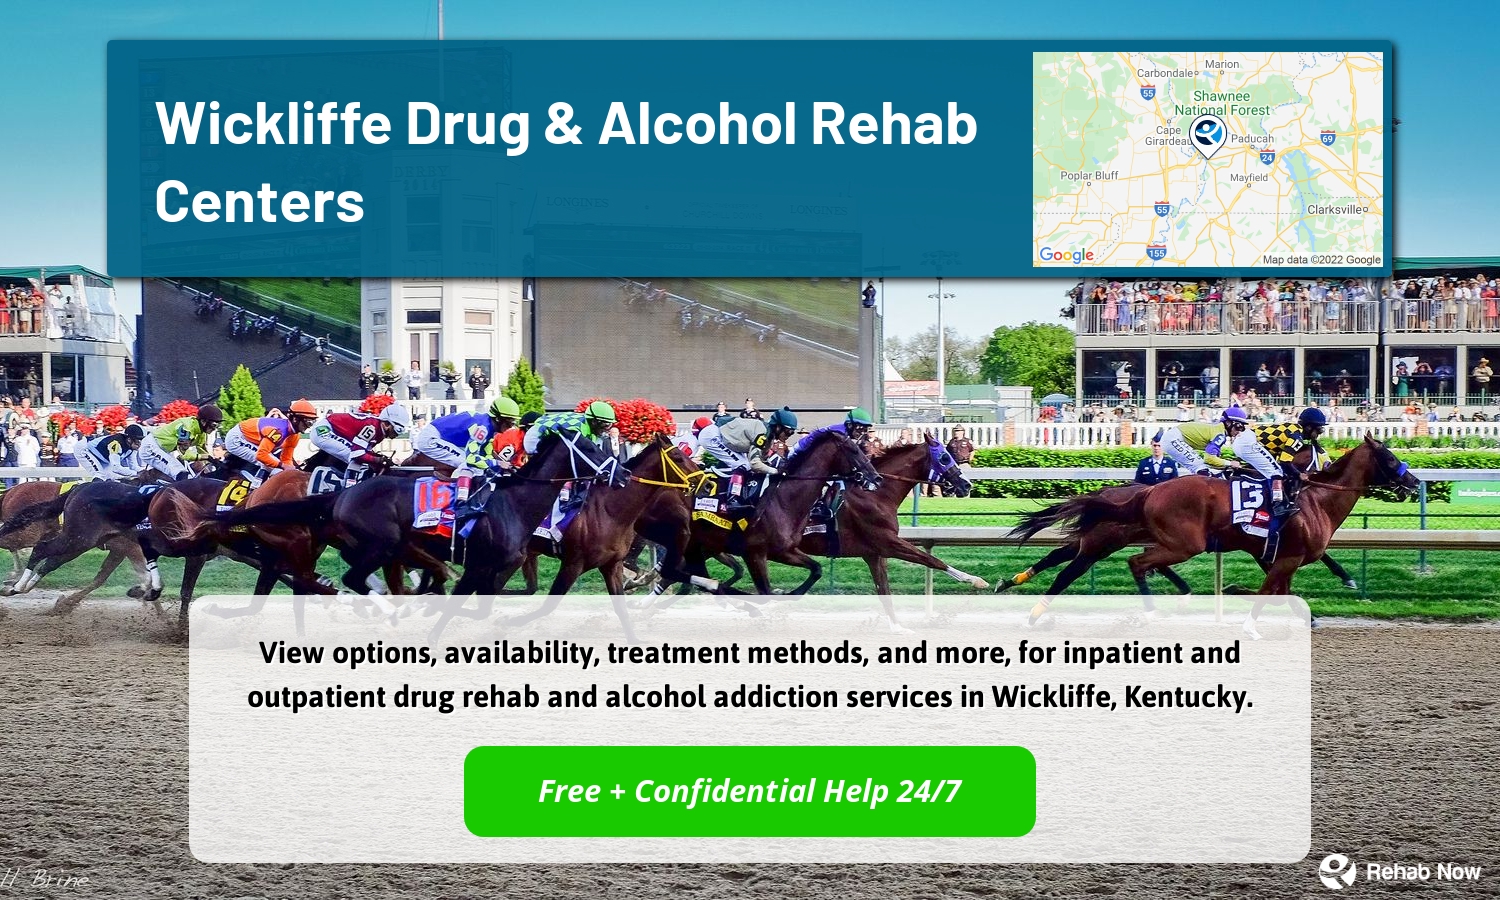 View options, availability, treatment methods, and more, for inpatient and outpatient drug rehab and alcohol addiction services in Wickliffe, Kentucky.